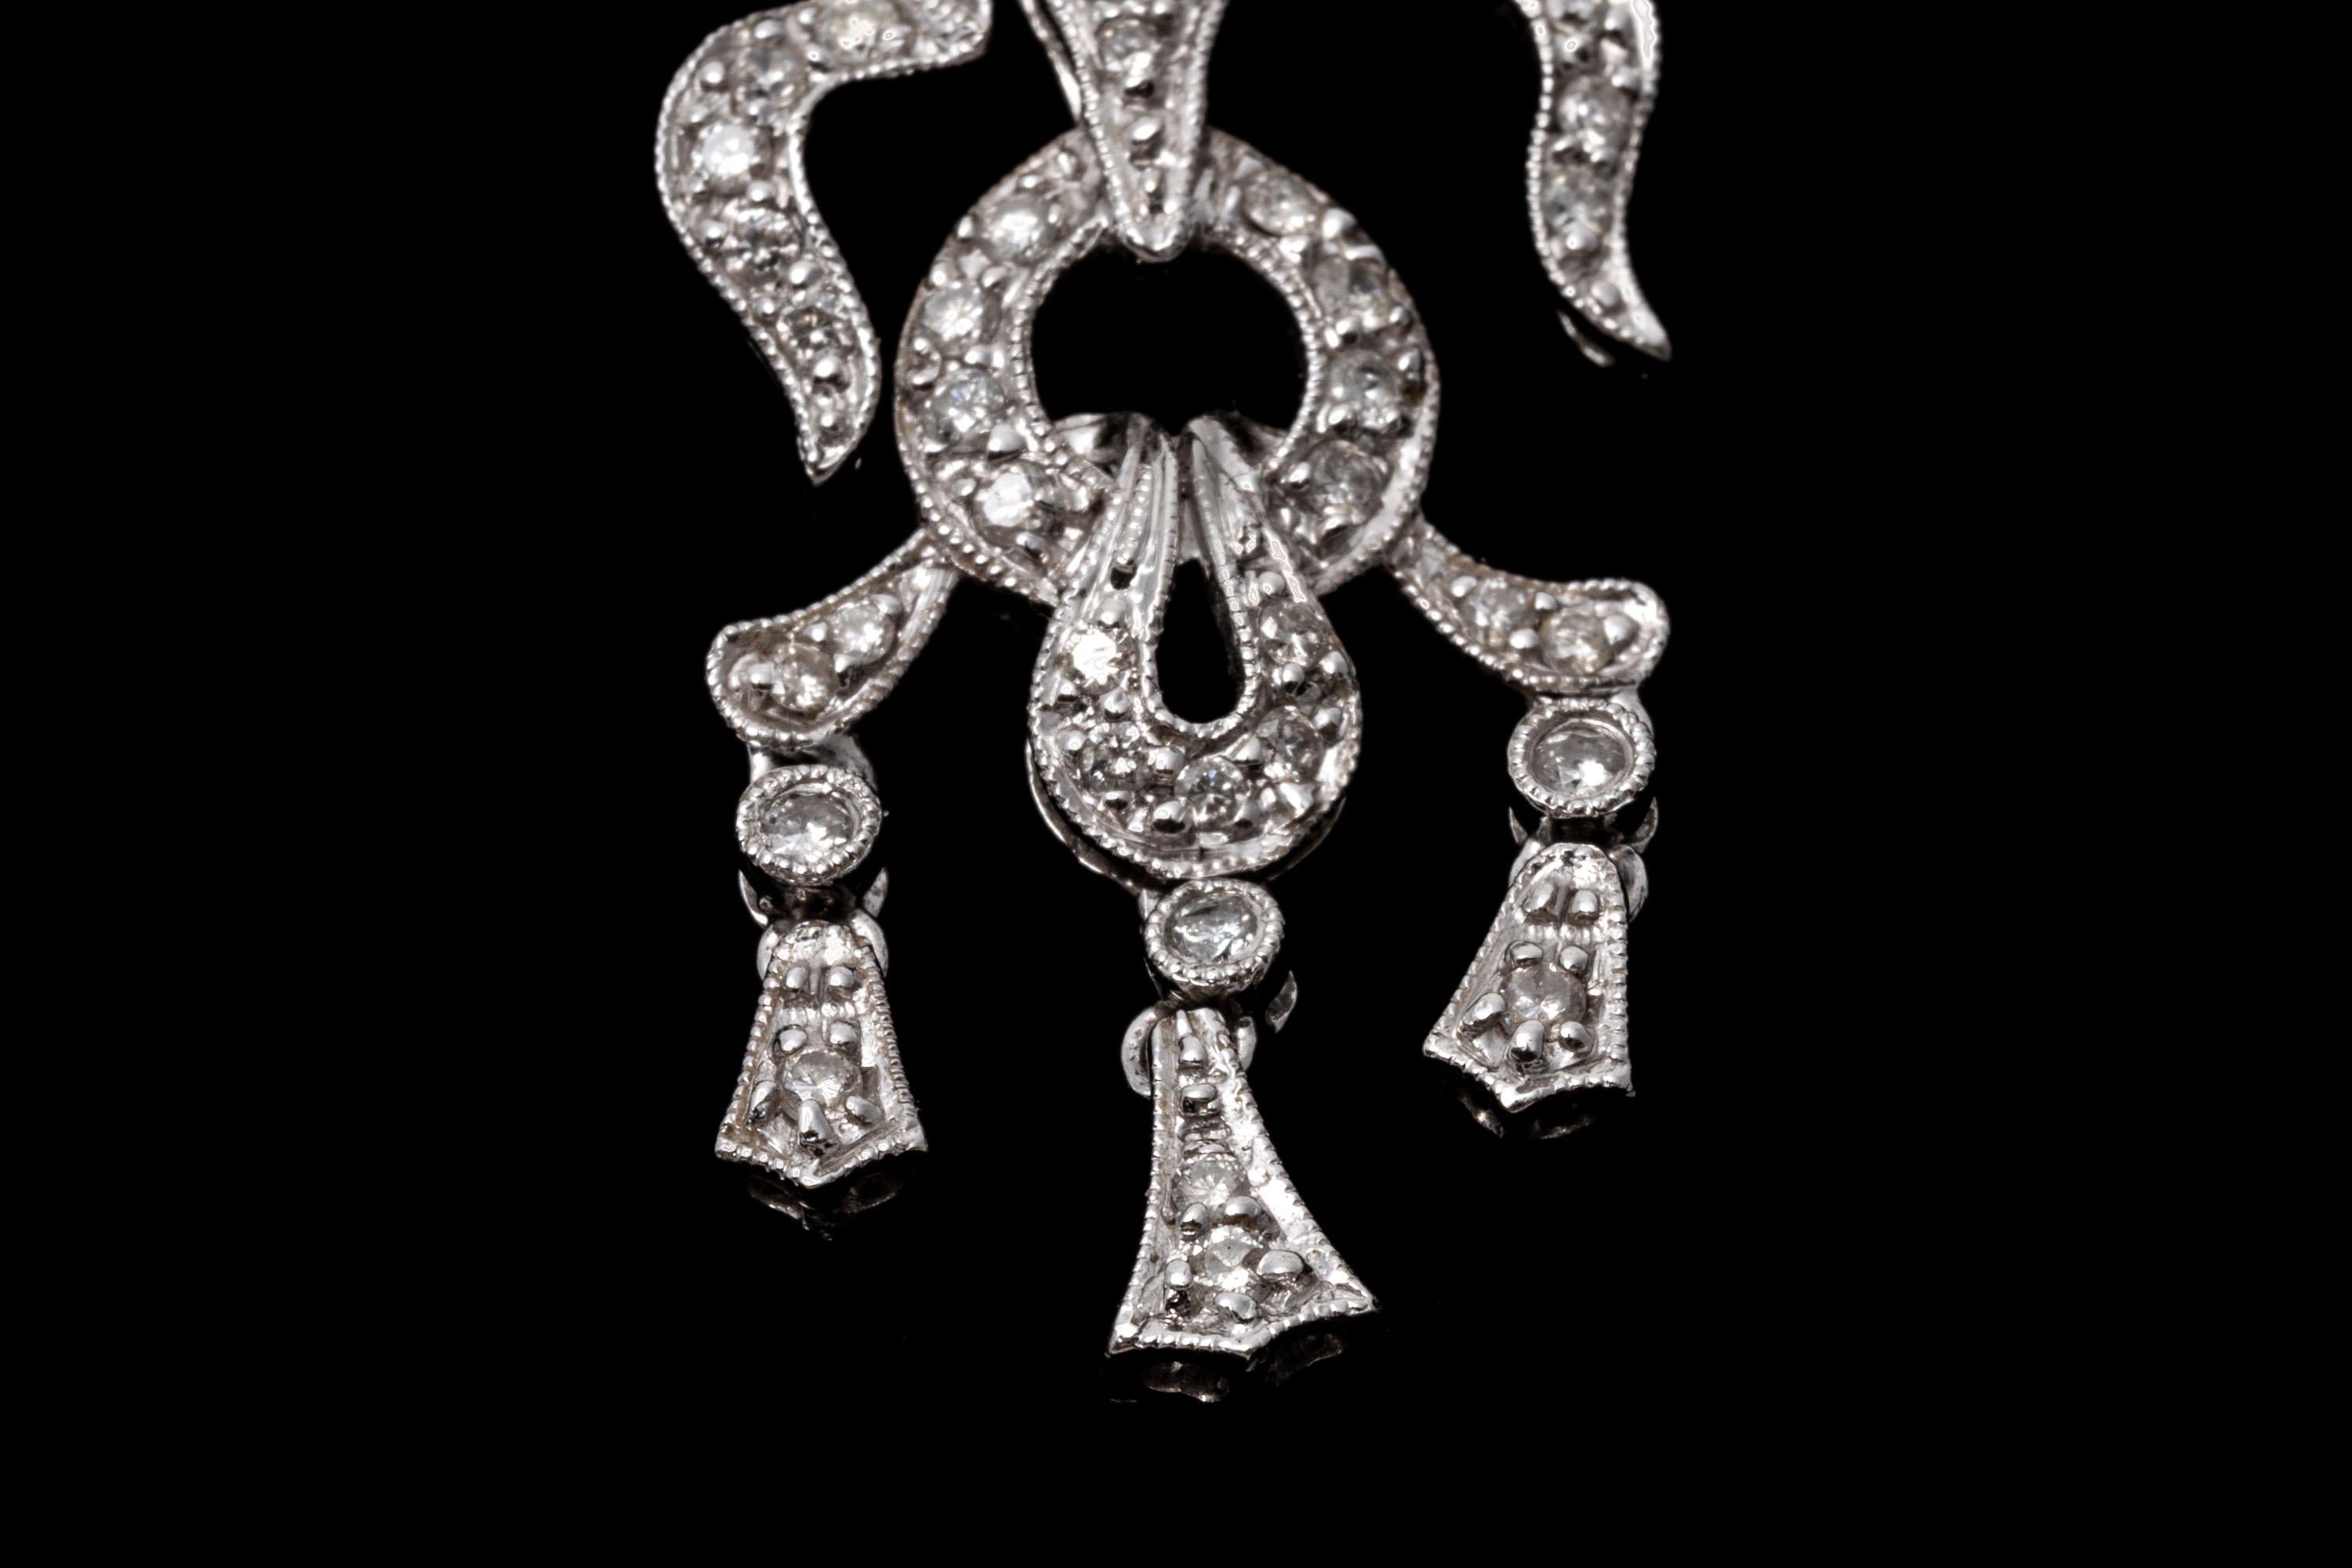 Contemporary 14K White Gold And Diamond Ornate Chandelier Earrings For Sale